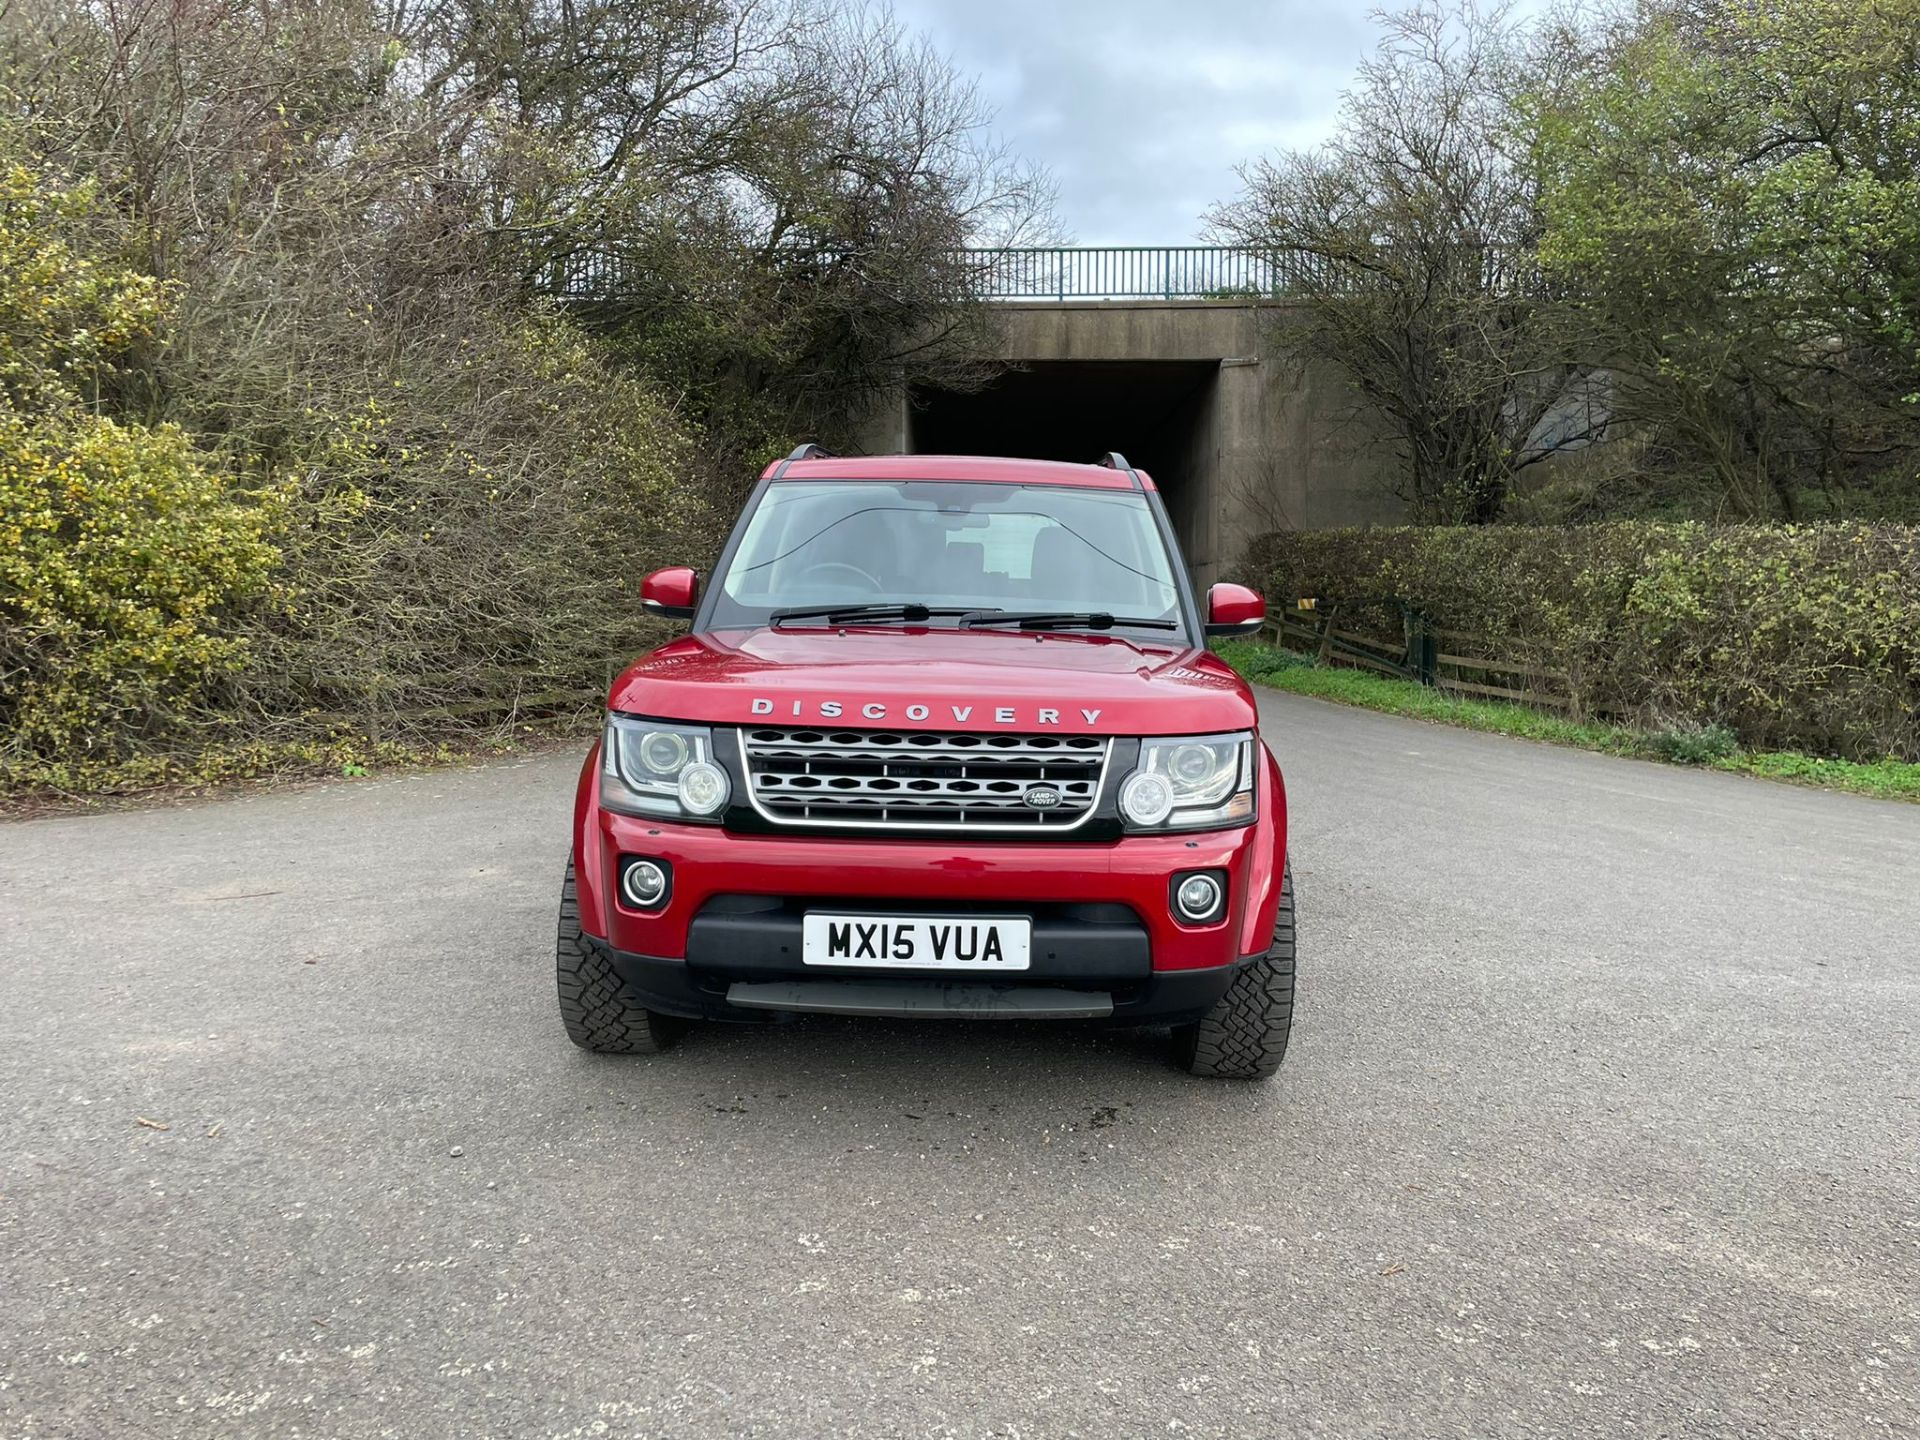 2015 LAND ROVER DISCOVERY XS SDV6 AUTO RED AUTOMATIC *PLUS VAT* - Image 2 of 16